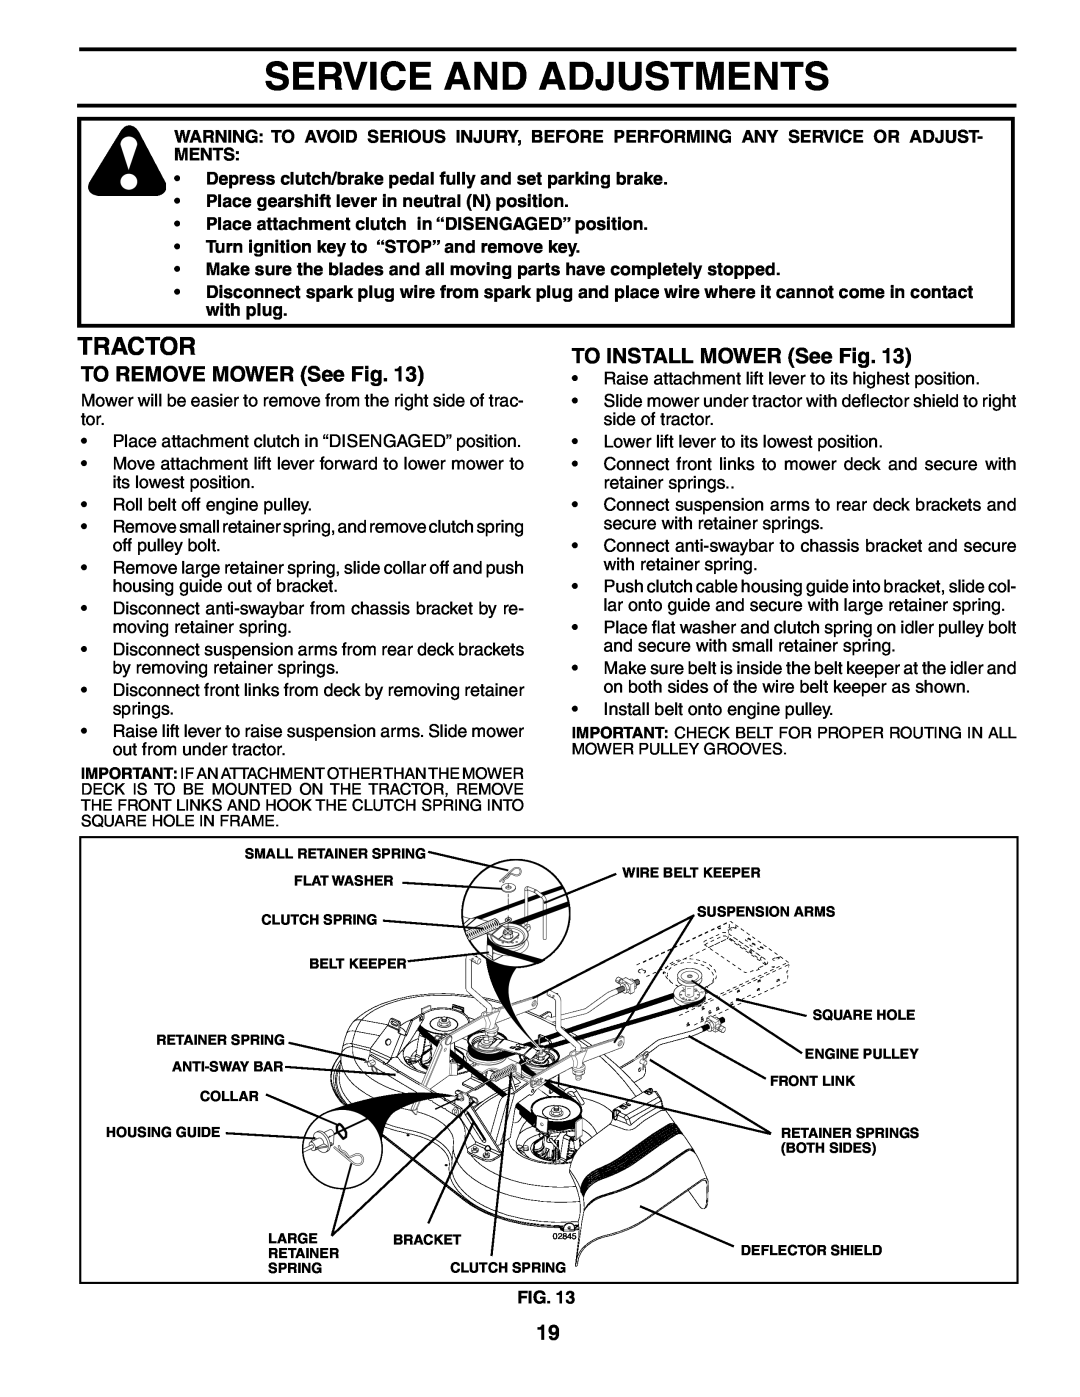 Weed Eater HD13538 manual Service And Adjustments, TO REMOVE MOWER See Fig, TO INSTALL MOWER See Fig, Tractor 